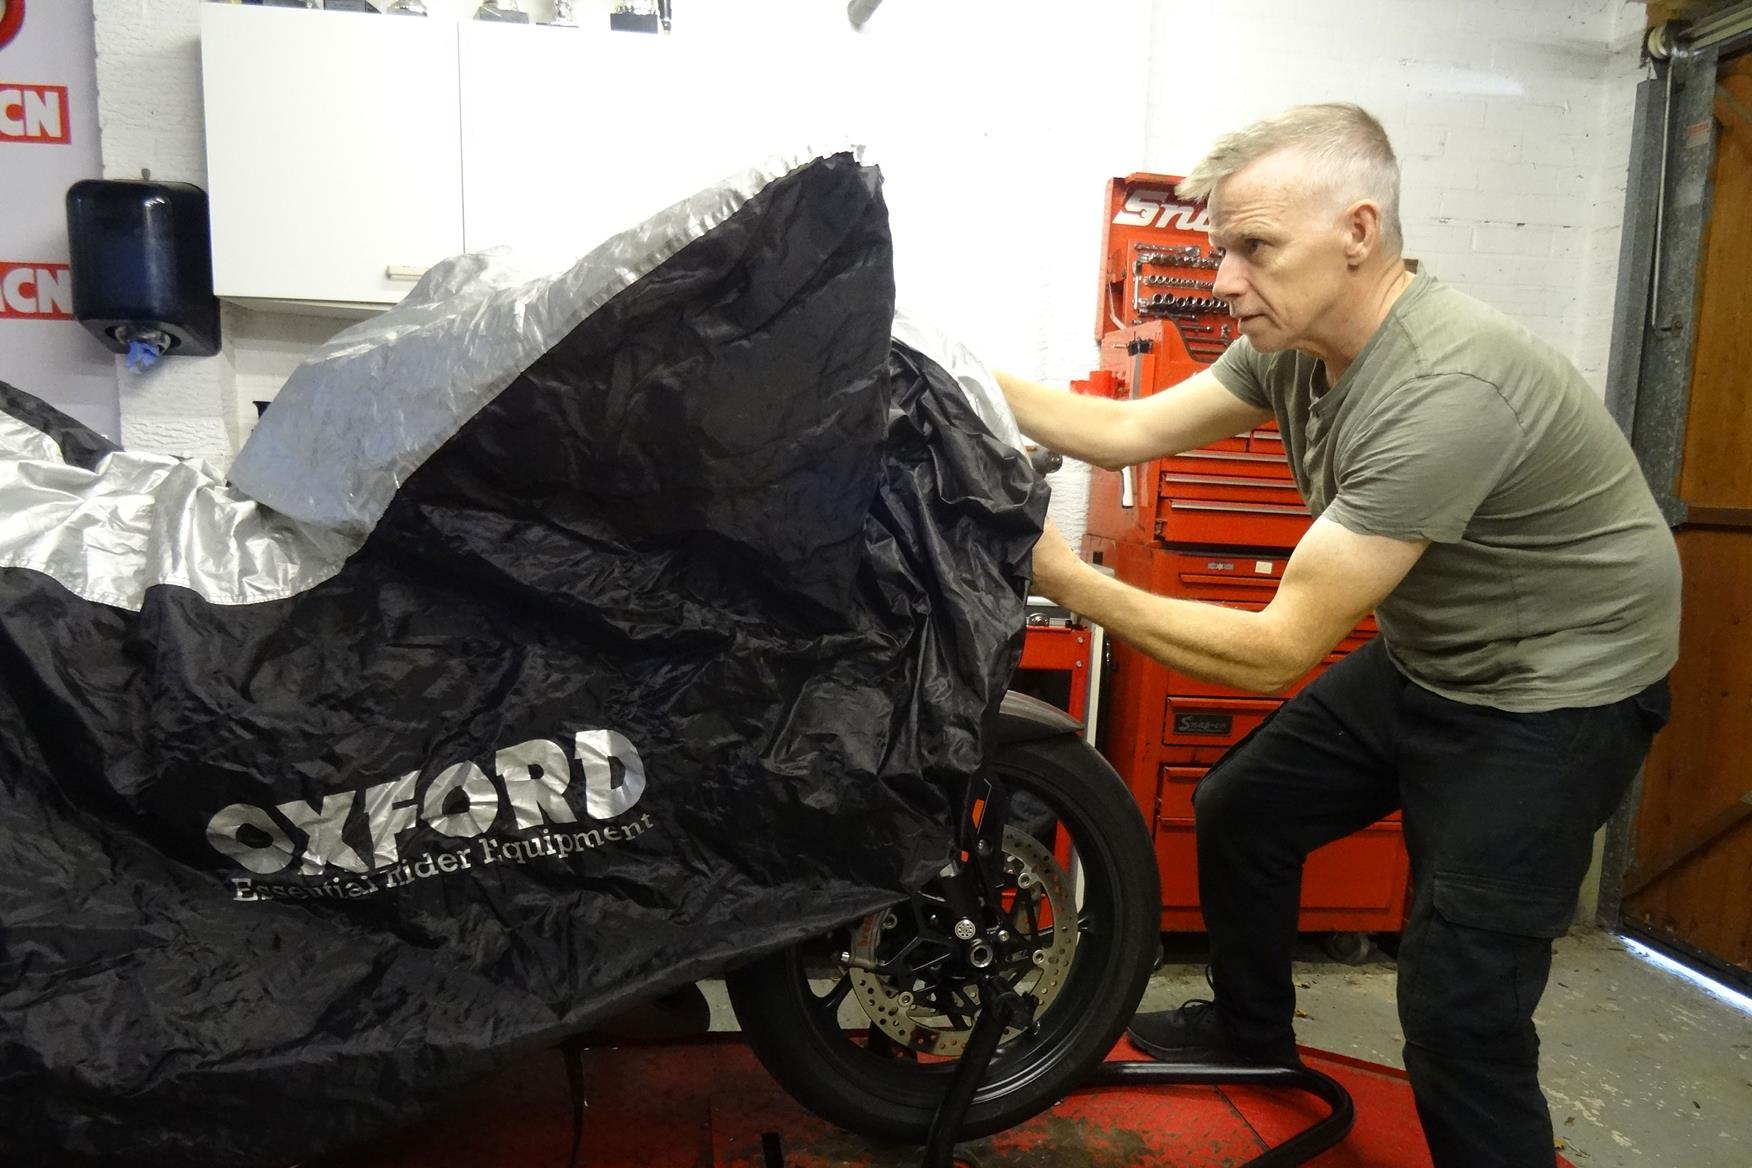 Best indoor and outdoor motorcycle covers tried and tested